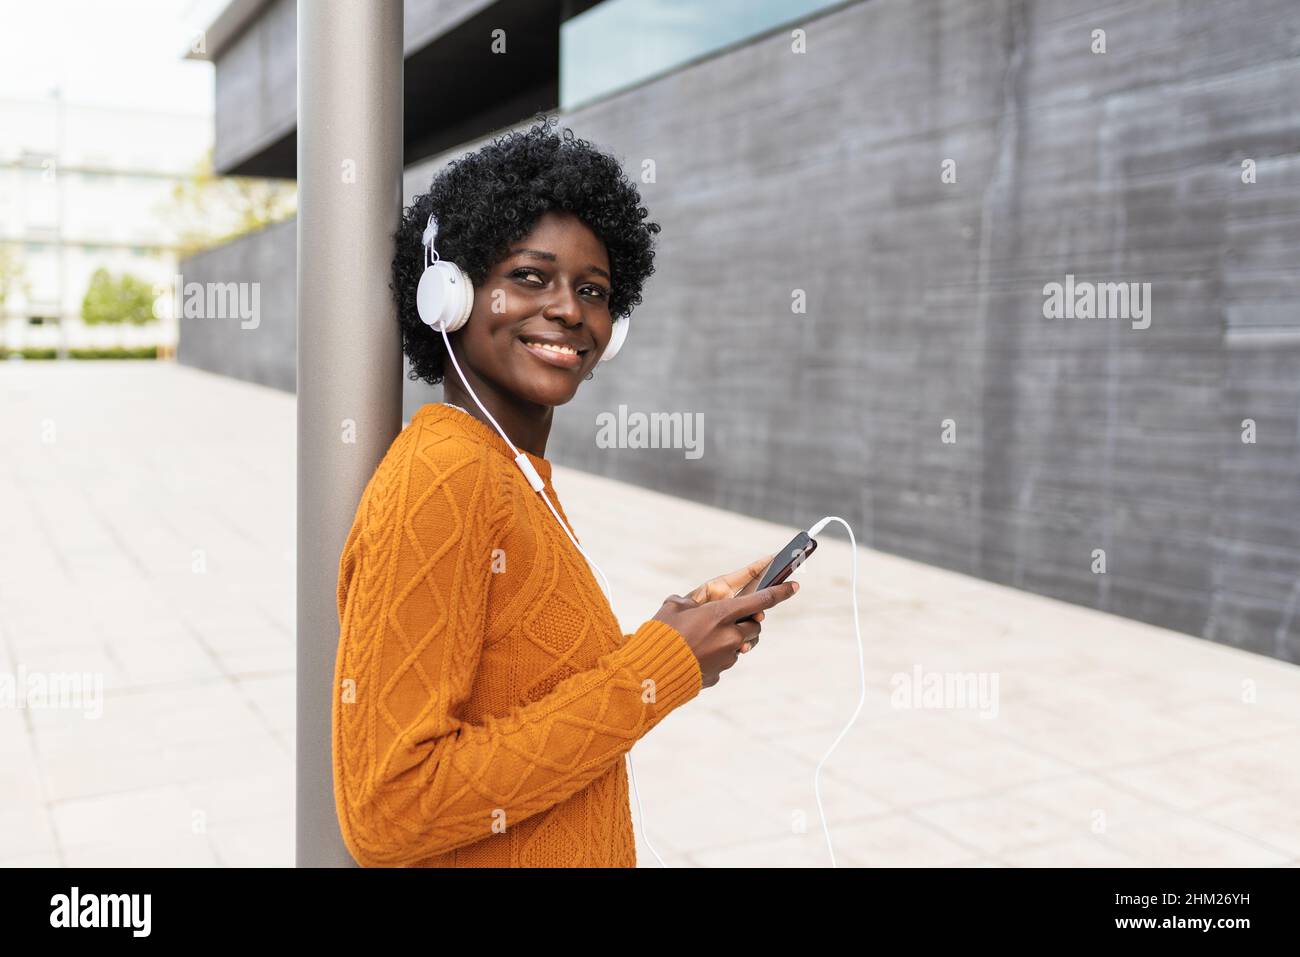 Black woman enjoying listening music with mobile phone and headphones outdoors on the street. Stock Photo